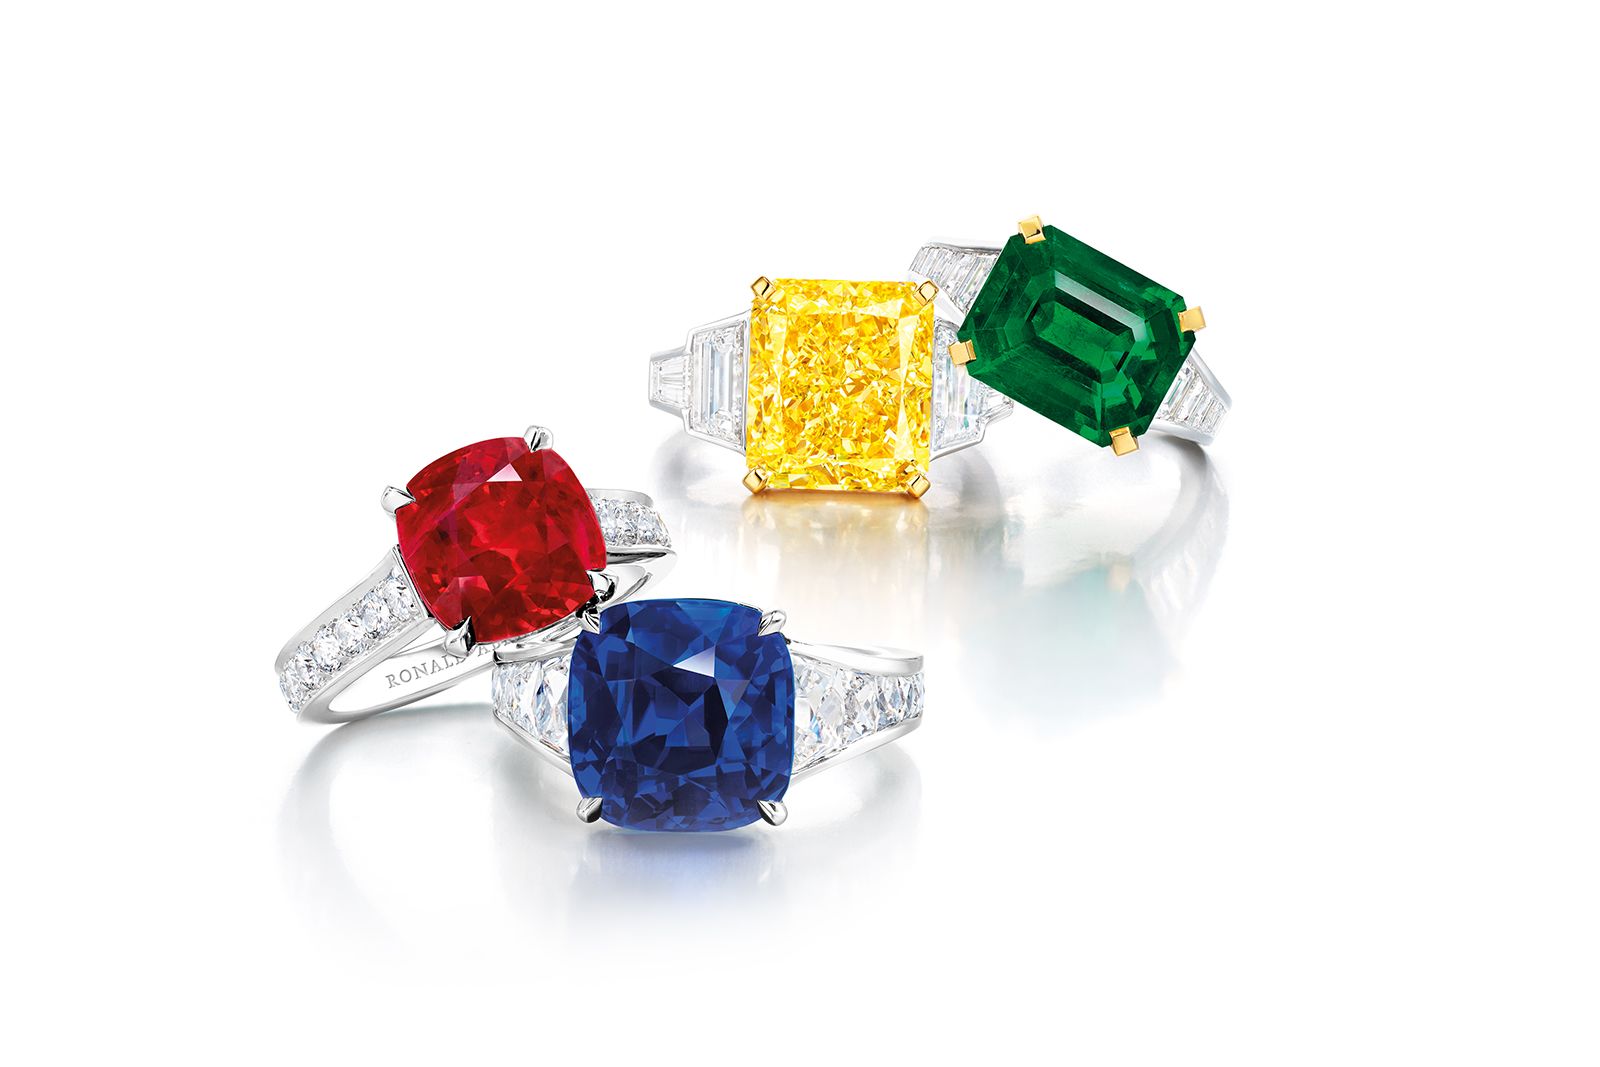 Collection of high jewellery rings by Ronald Abram